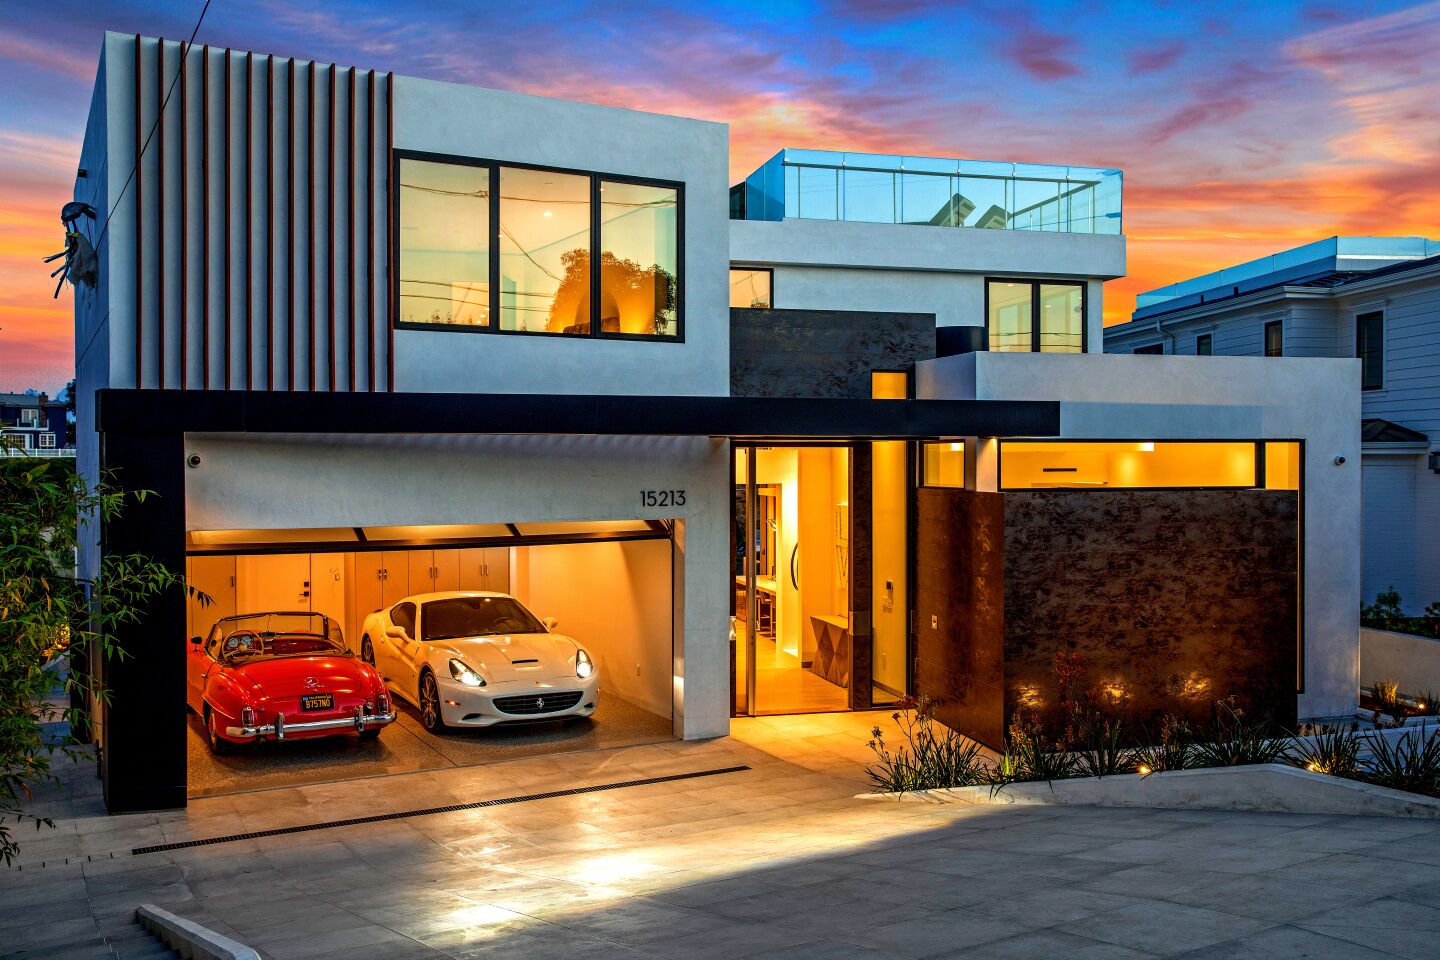 Two expensive cars sit in the lighted garage at the front of the home.